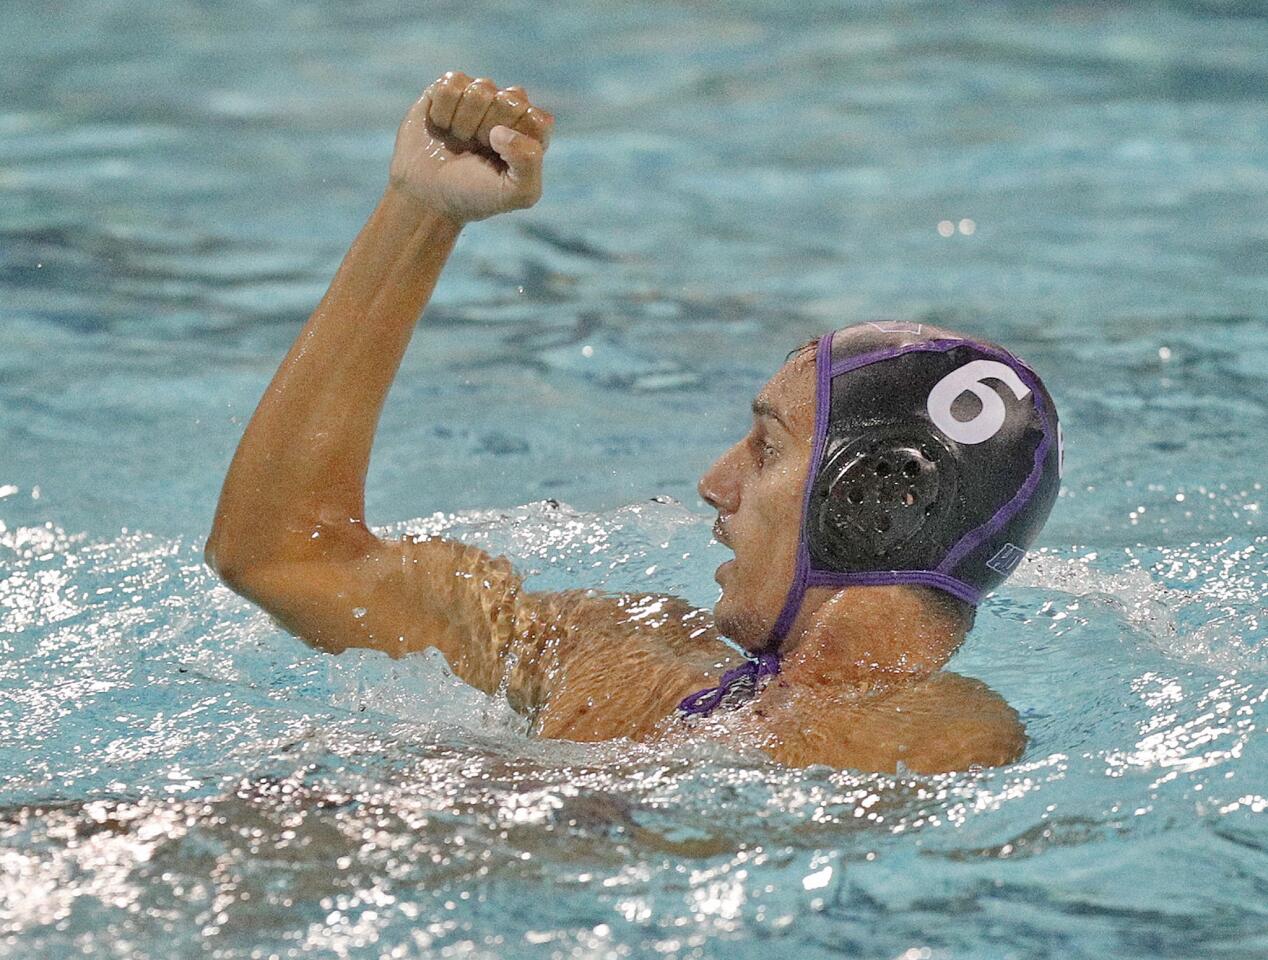 Photo Gallery: Hoover boys' water polo emerges as Pacific League Champions defeating Arcadia in championship